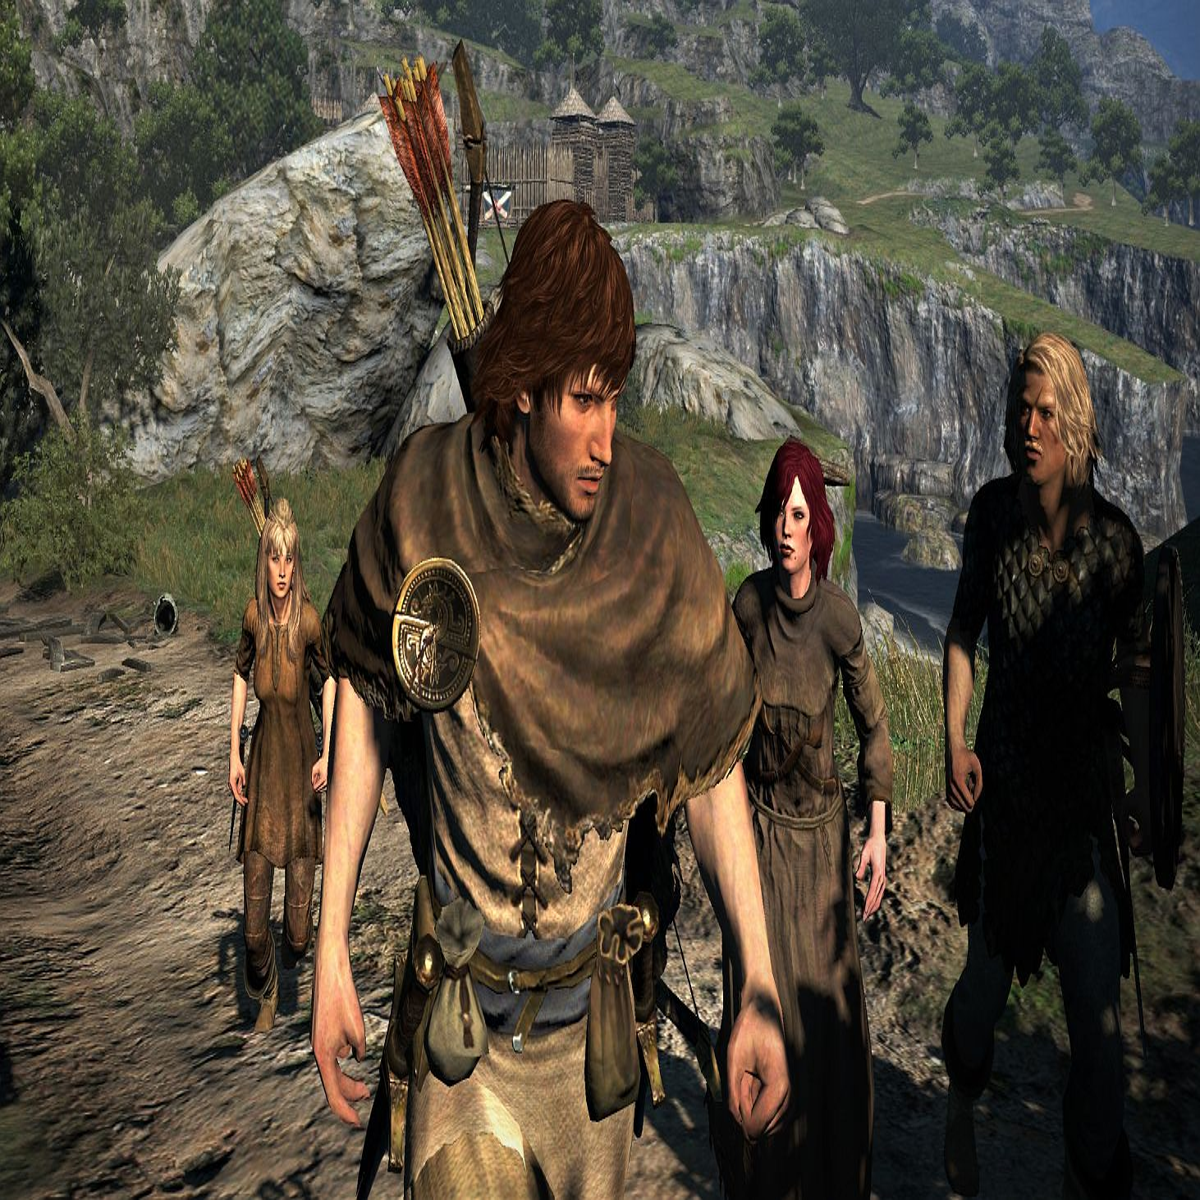 Dragon's Dogma - #1971 by GreenWeej - Games - Quarter To Three Forums